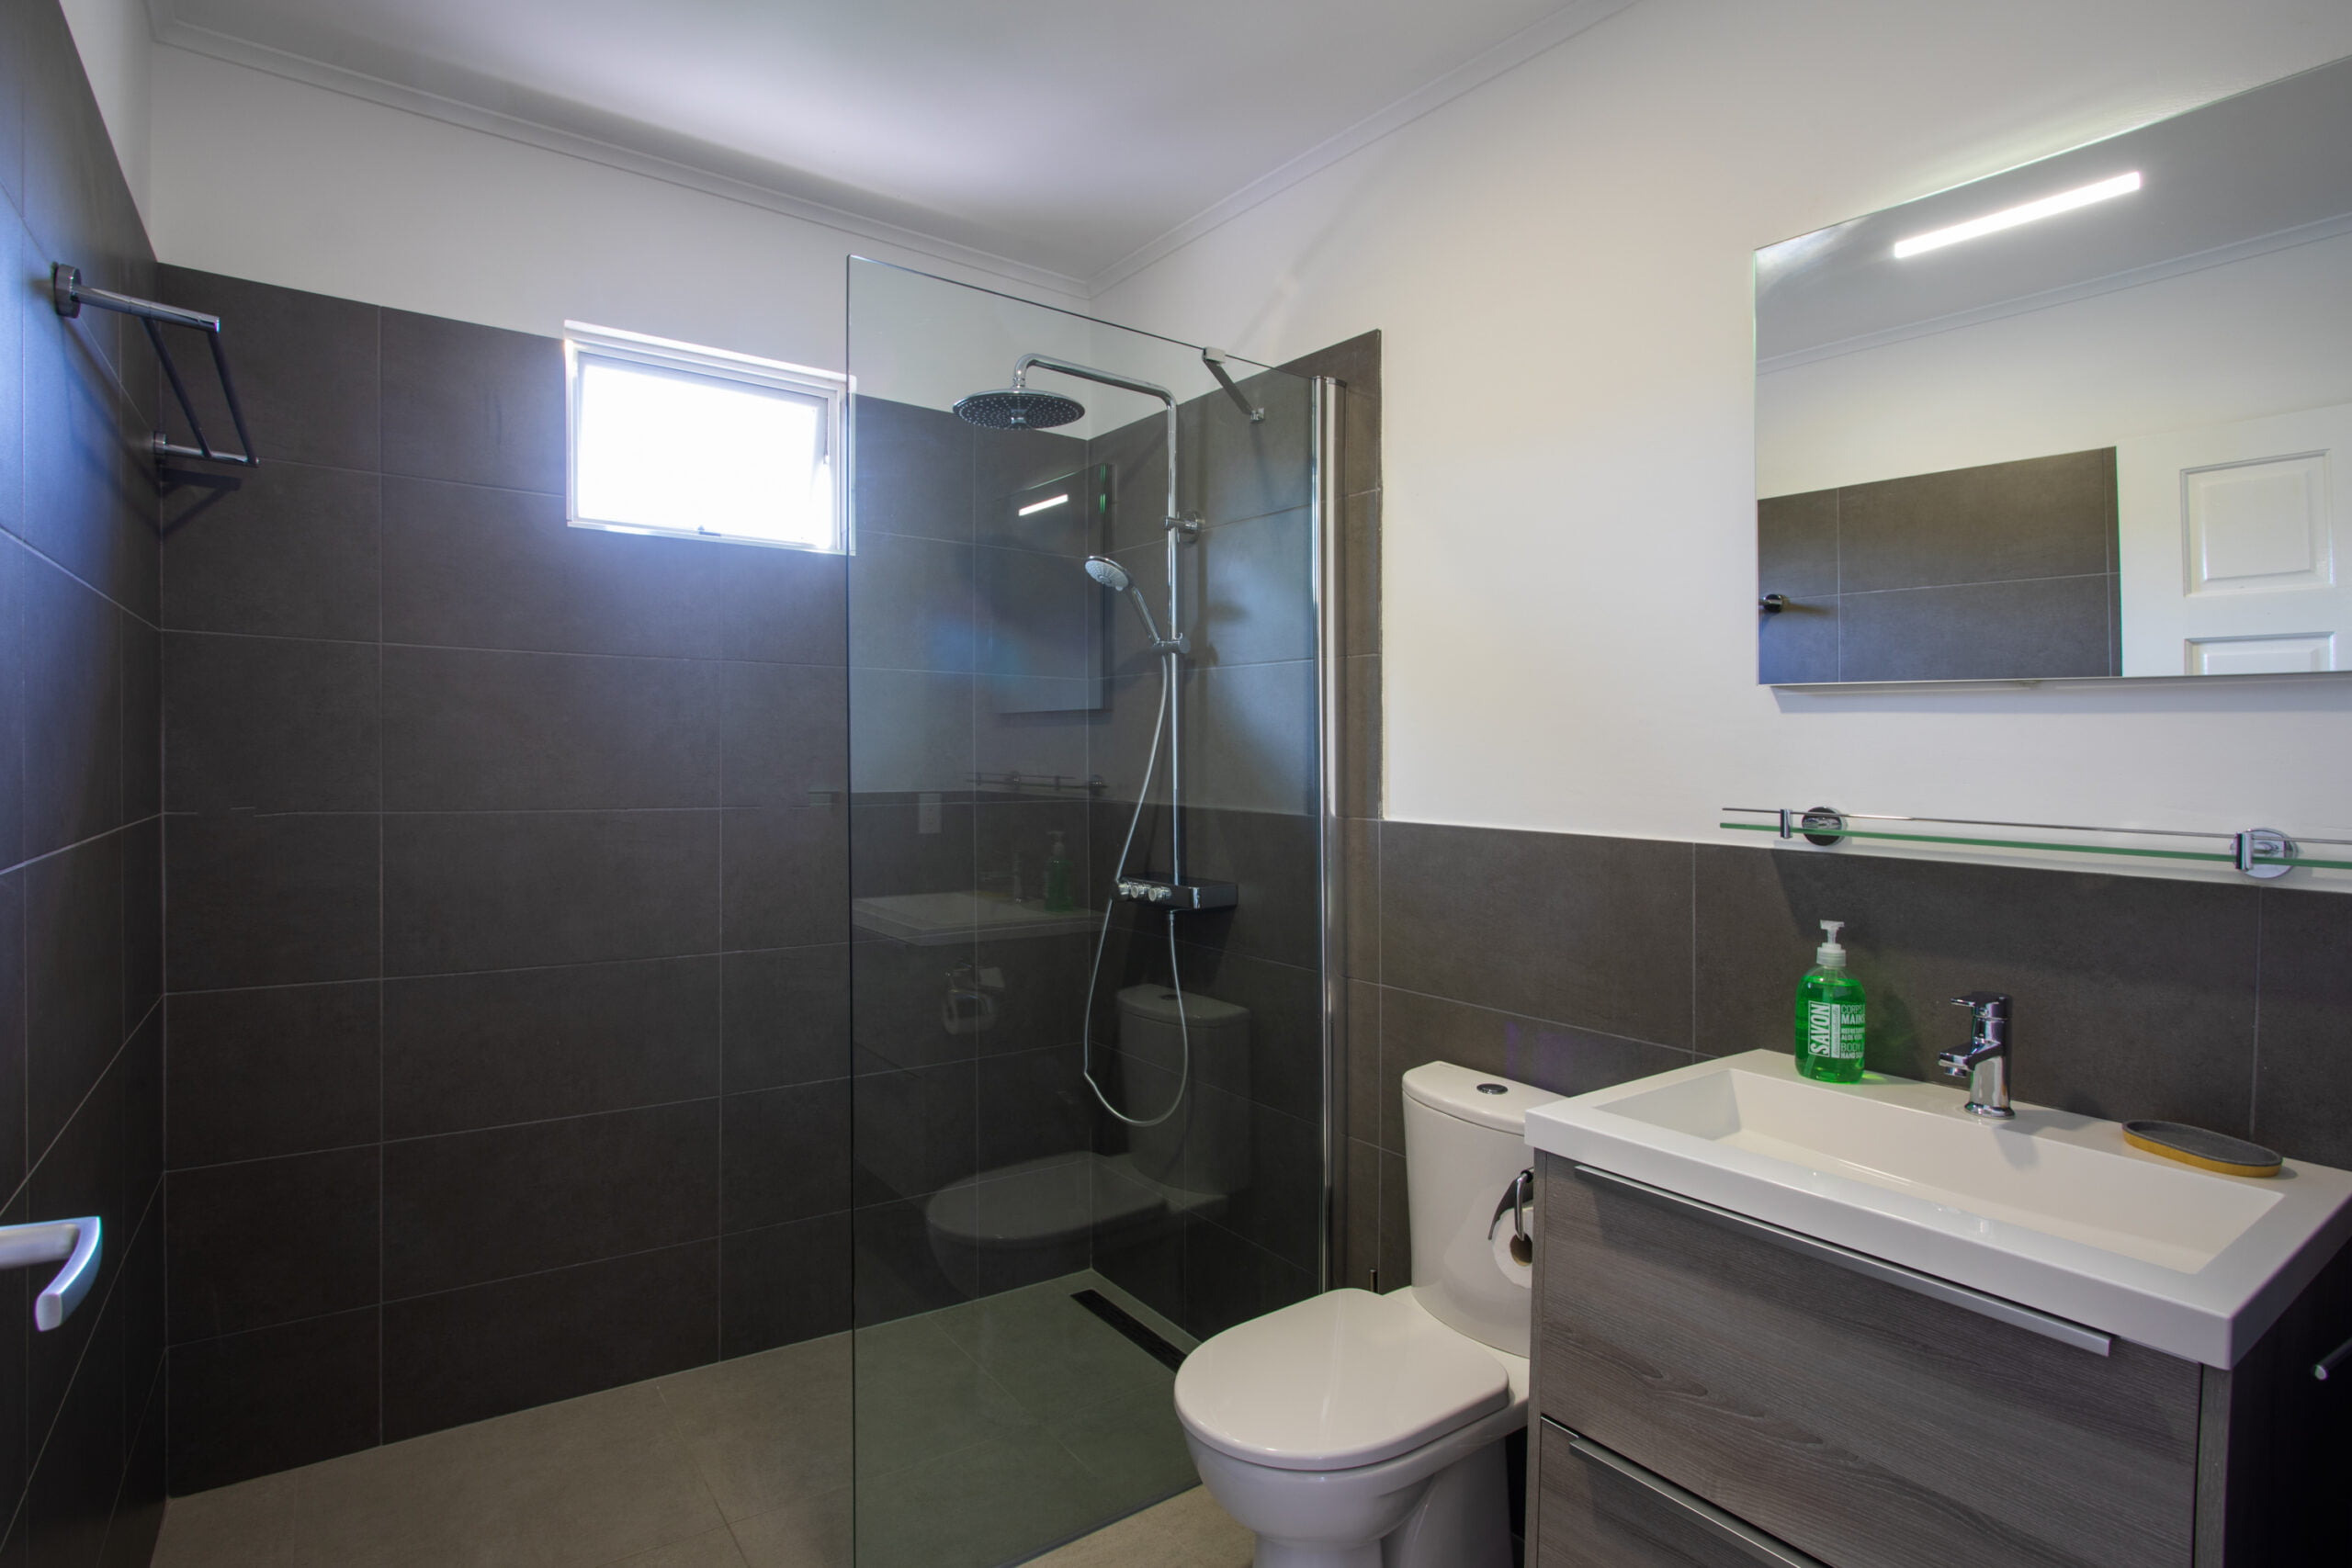 The 2nd neat bathroom with shower